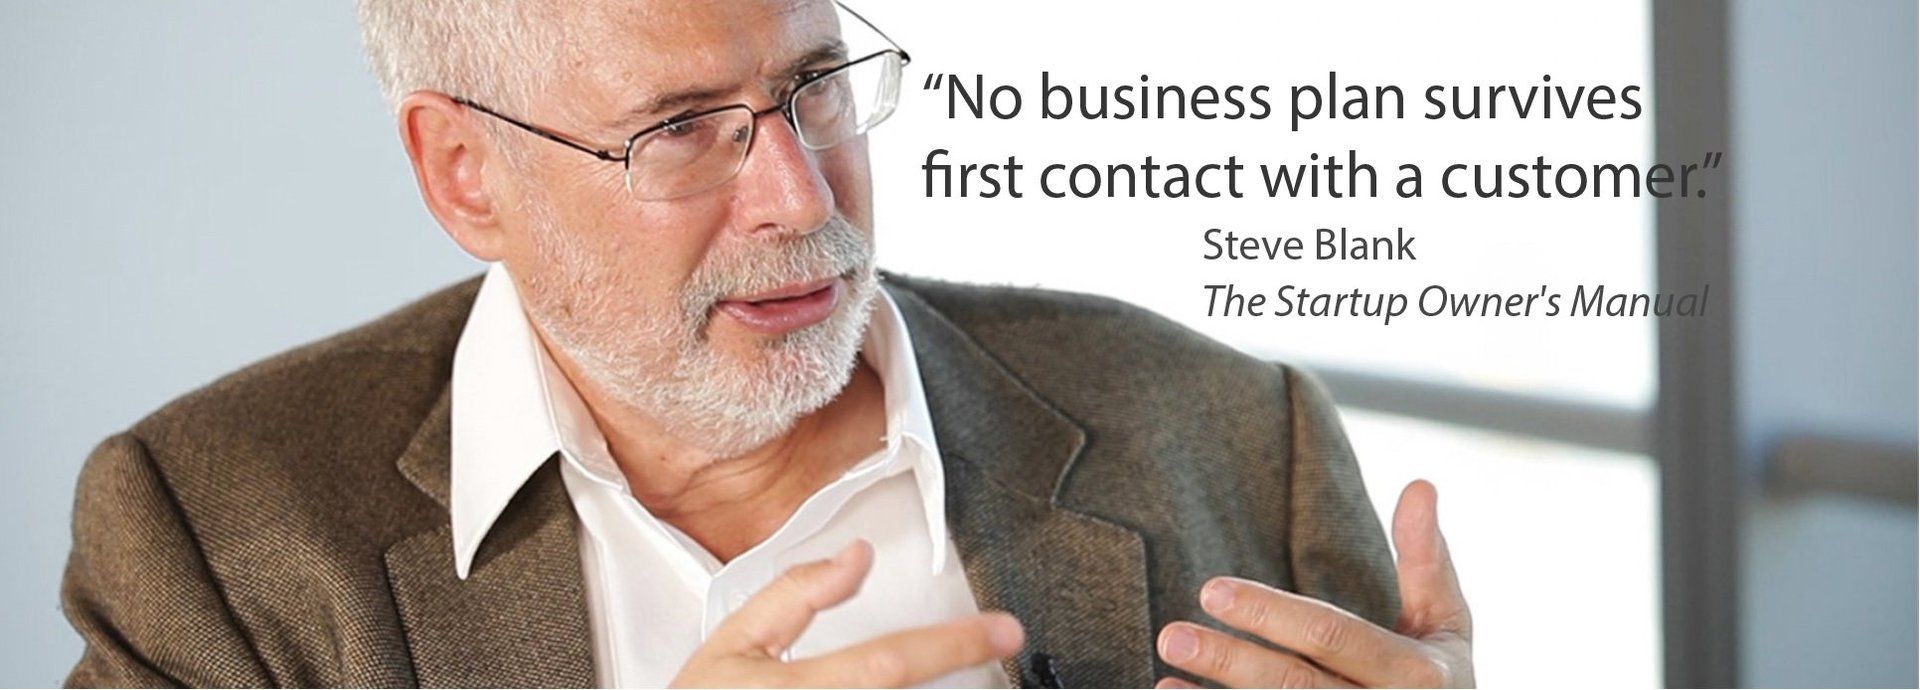 Steve Blank: No business survives first contact with a customer